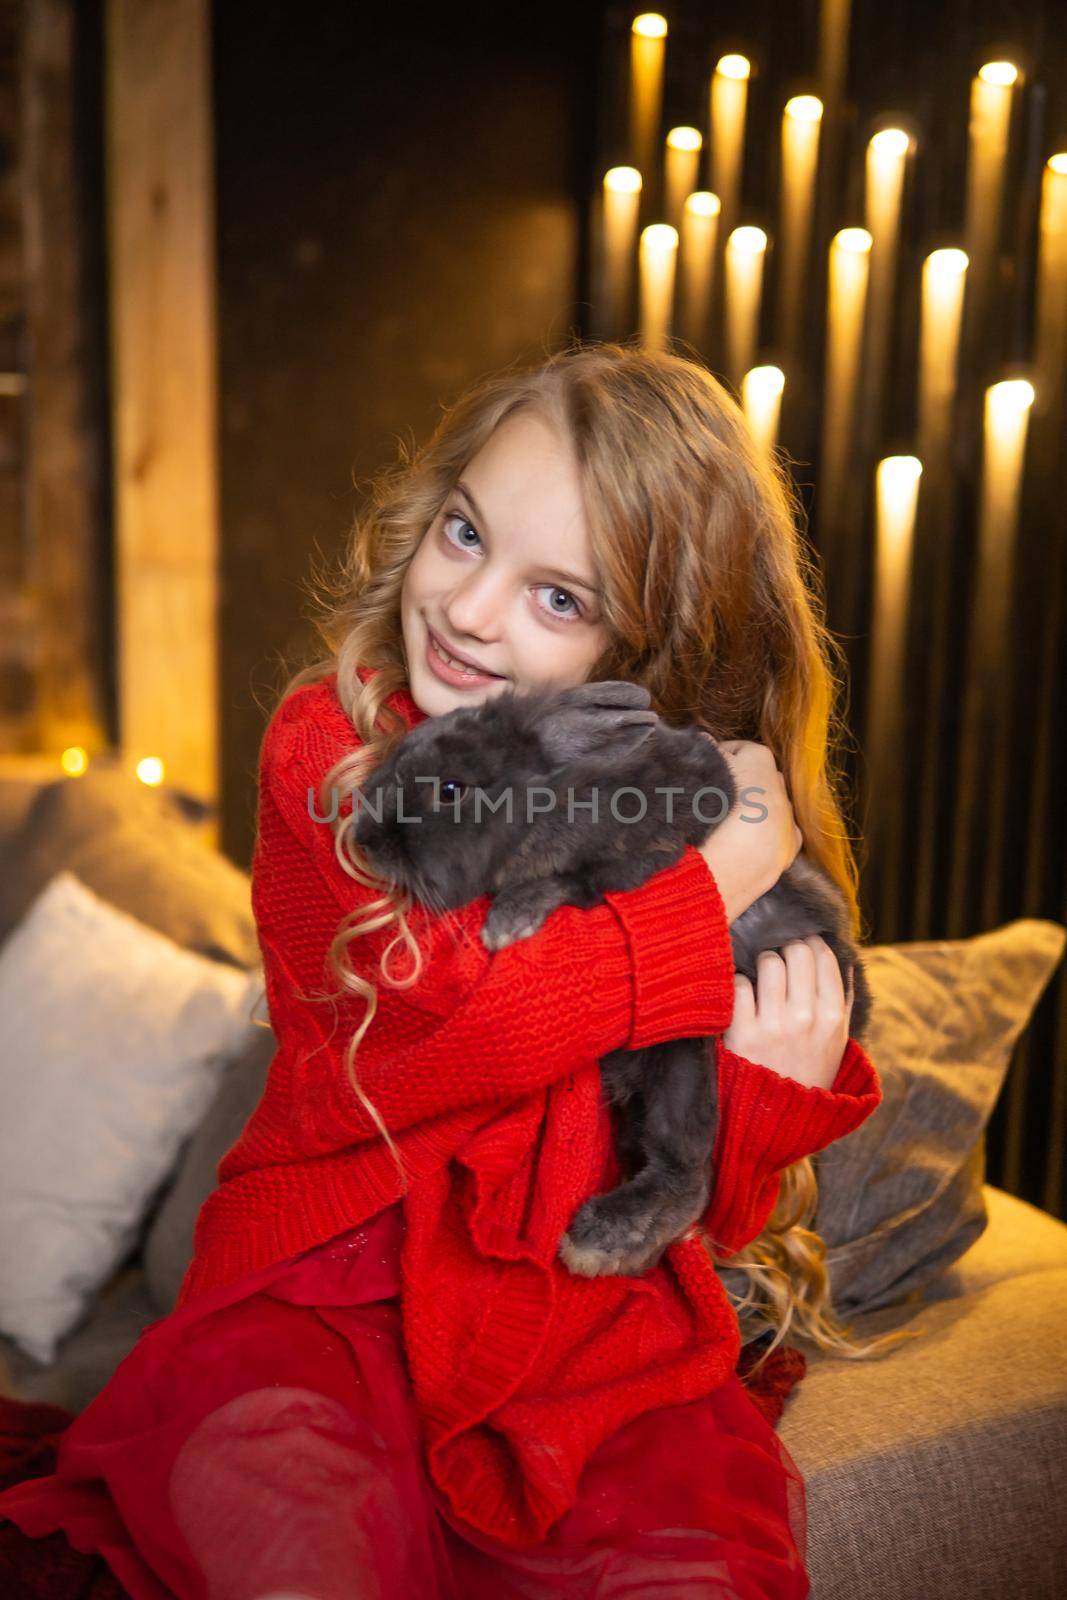 A little blonde girl with a gray rabbit in her arms next to a Christmas tree decorated with garlands by Annu1tochka